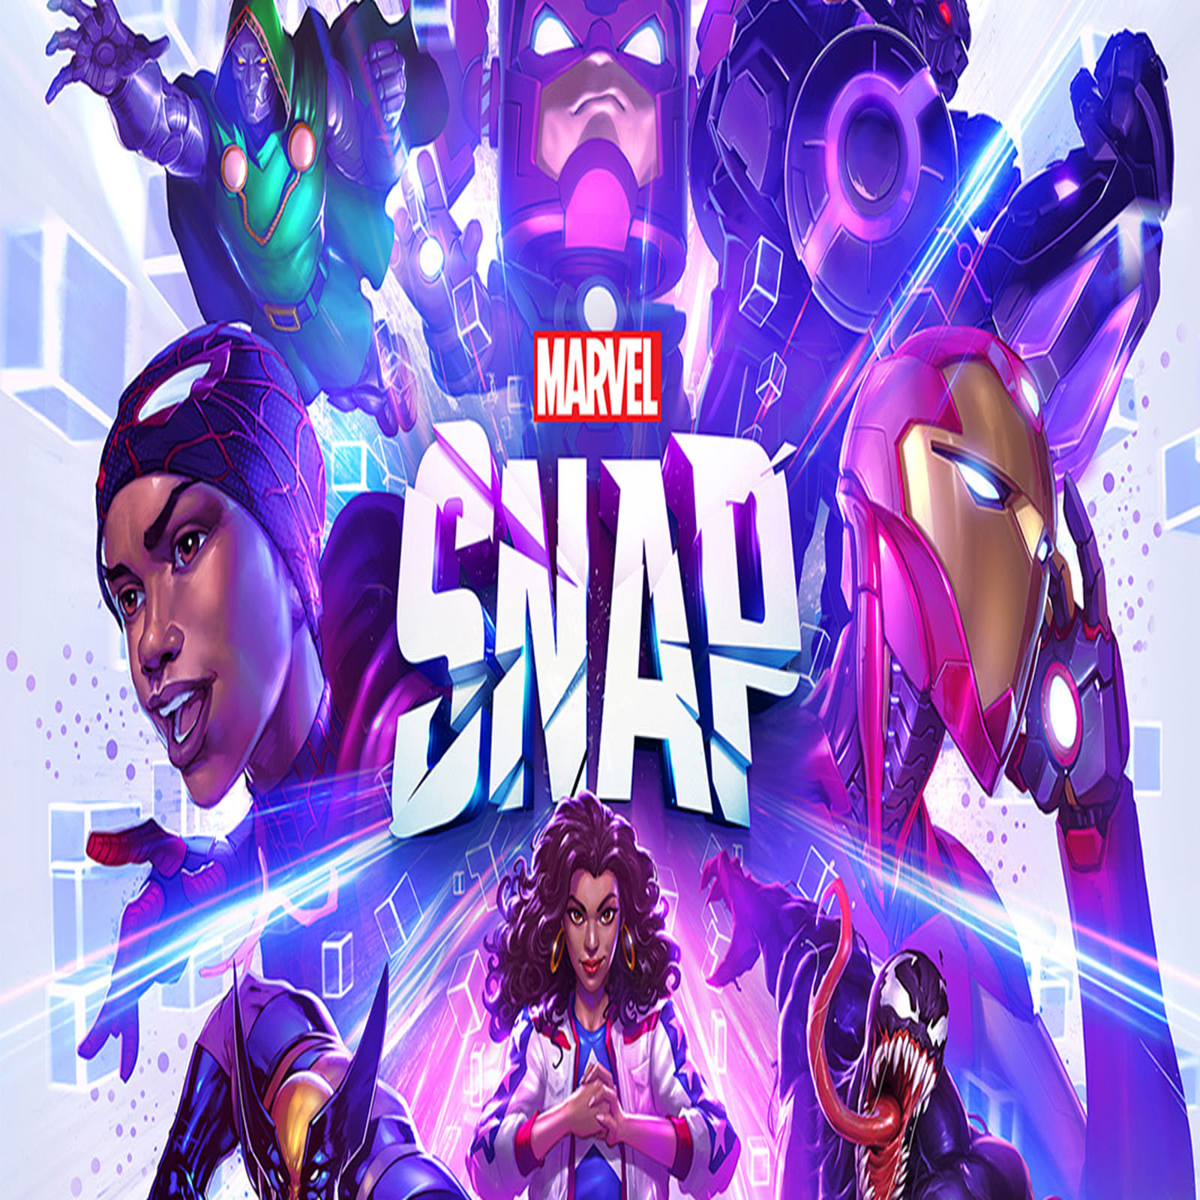 Marvel Snap devs say the card game won't go anywhere, as